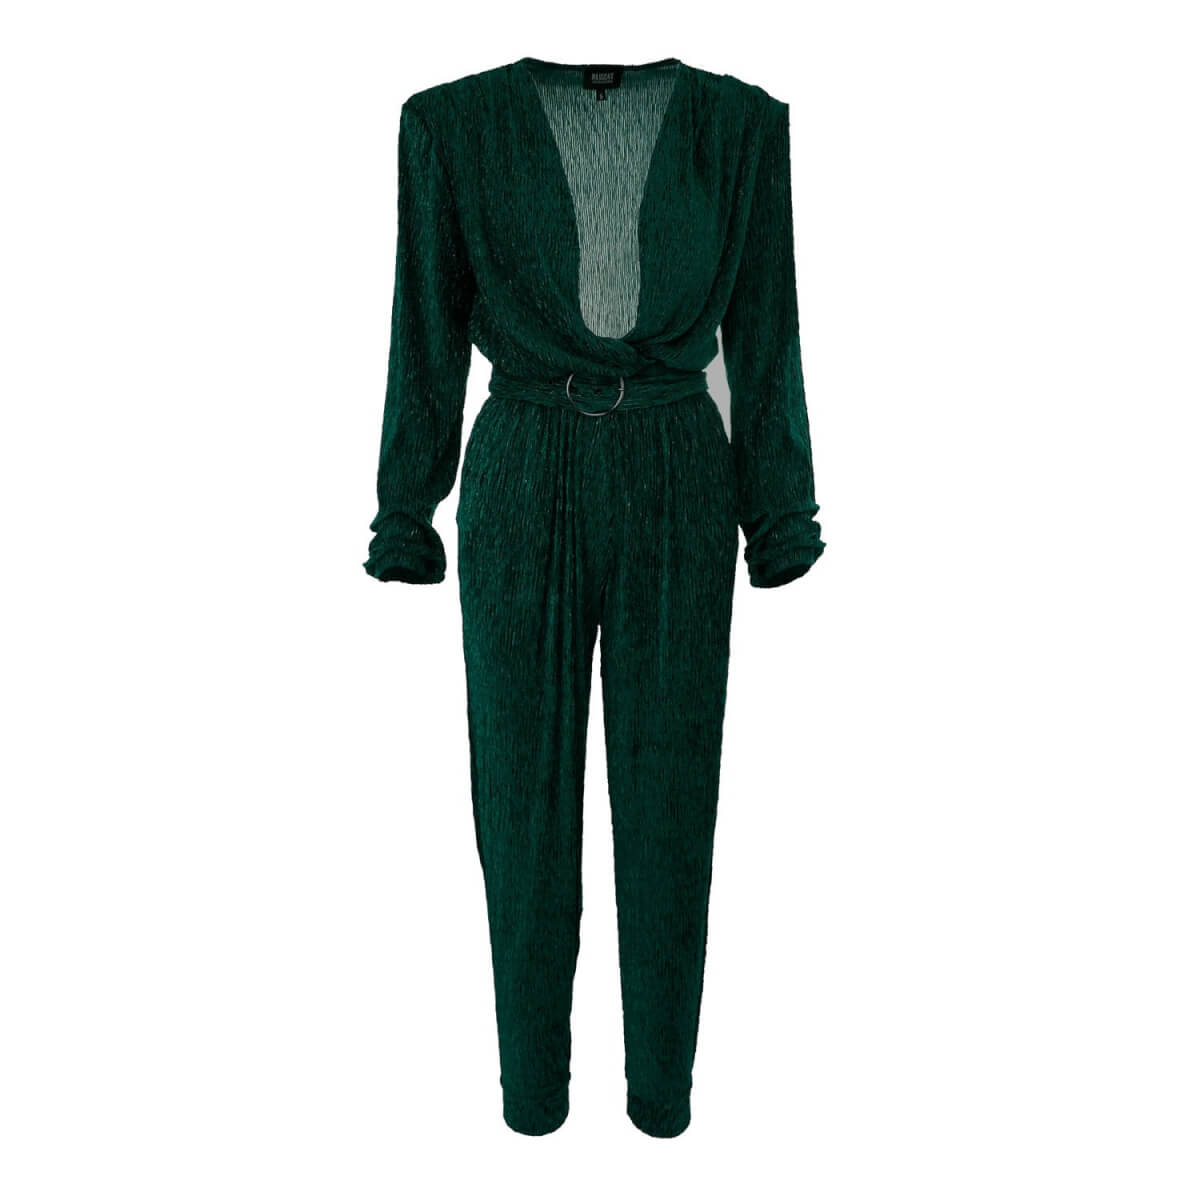 Women's Emerald Green Jumpsuit With Silver Inserts Extra Small Bluzat